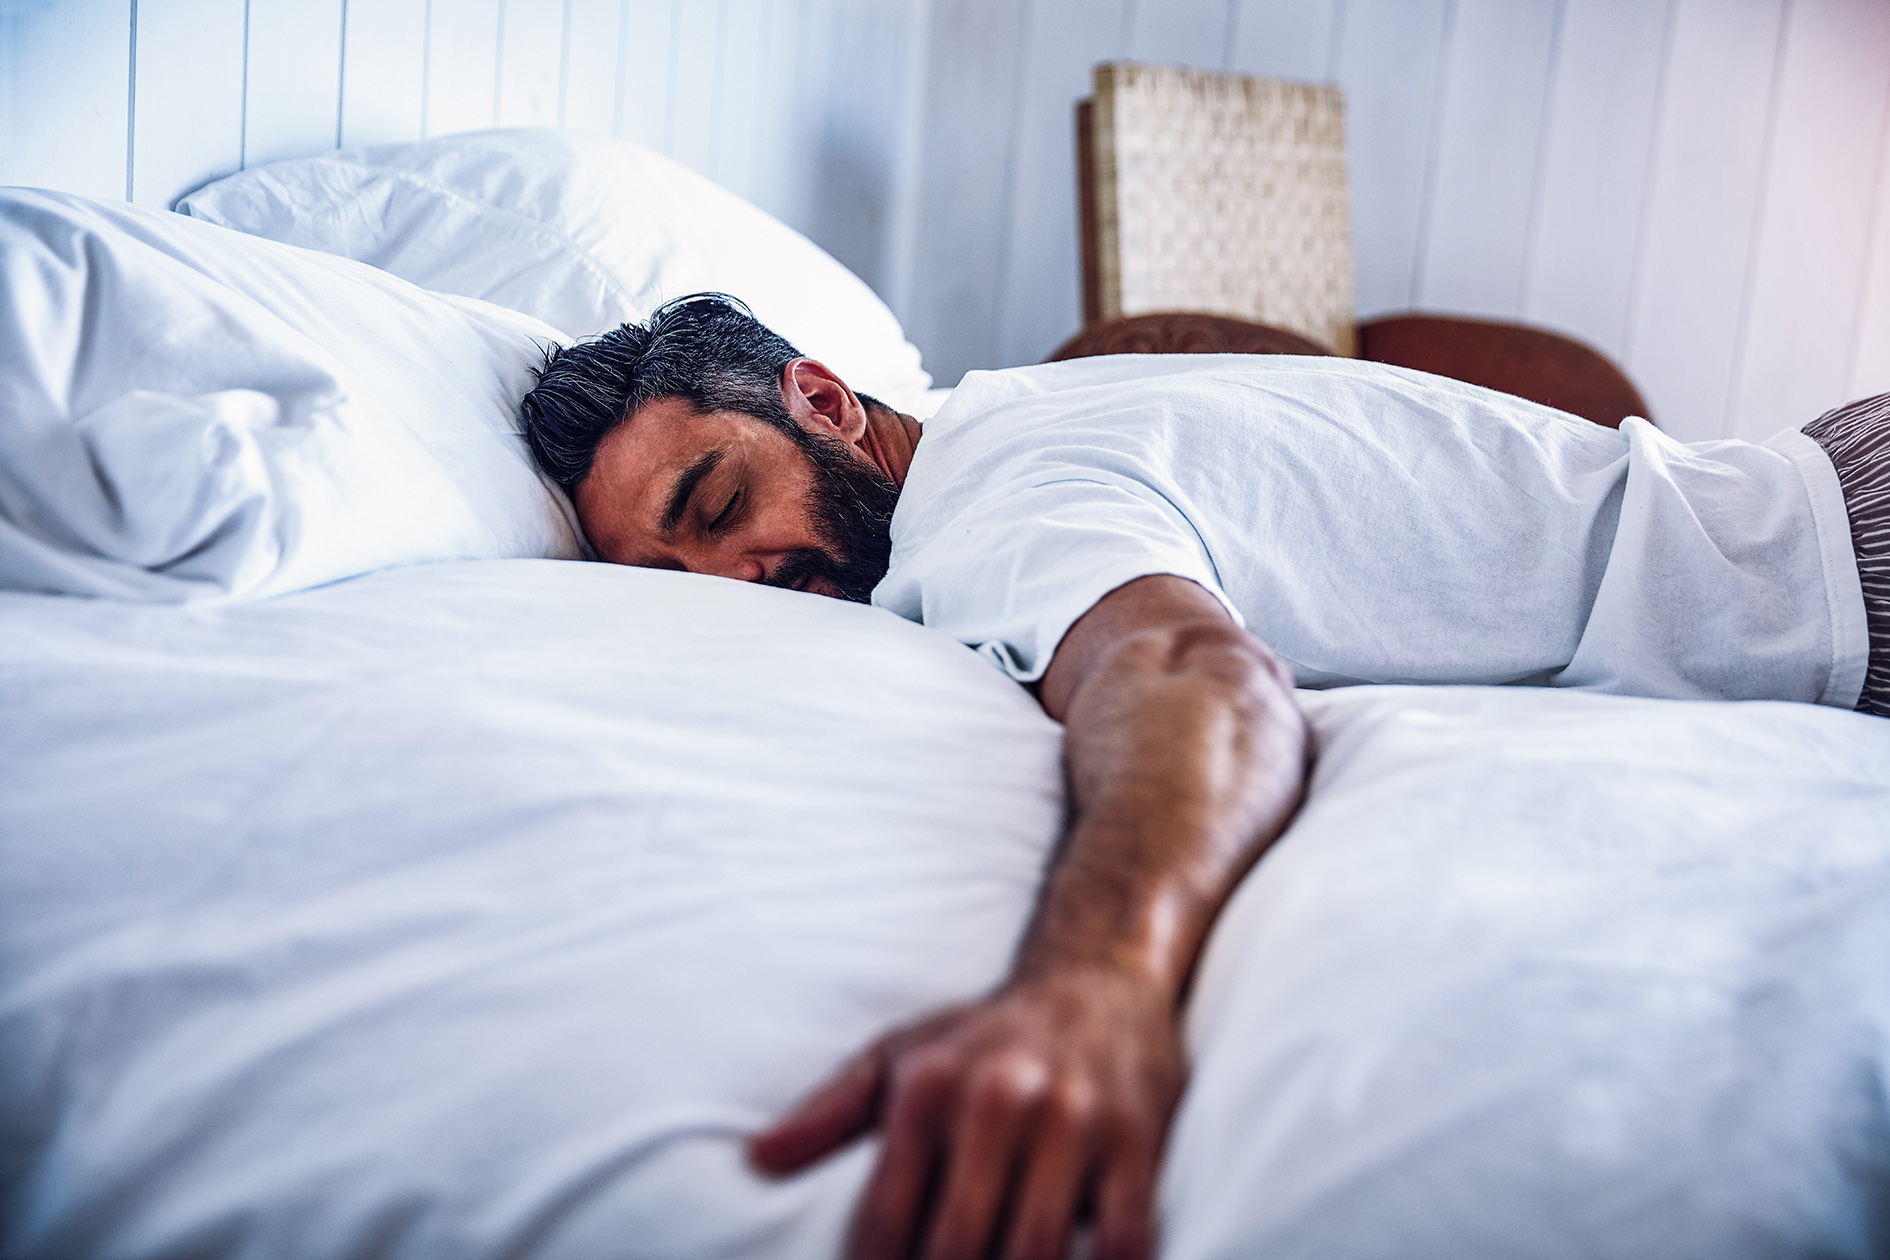 air conditioning units help provide a perfect sleep temperature